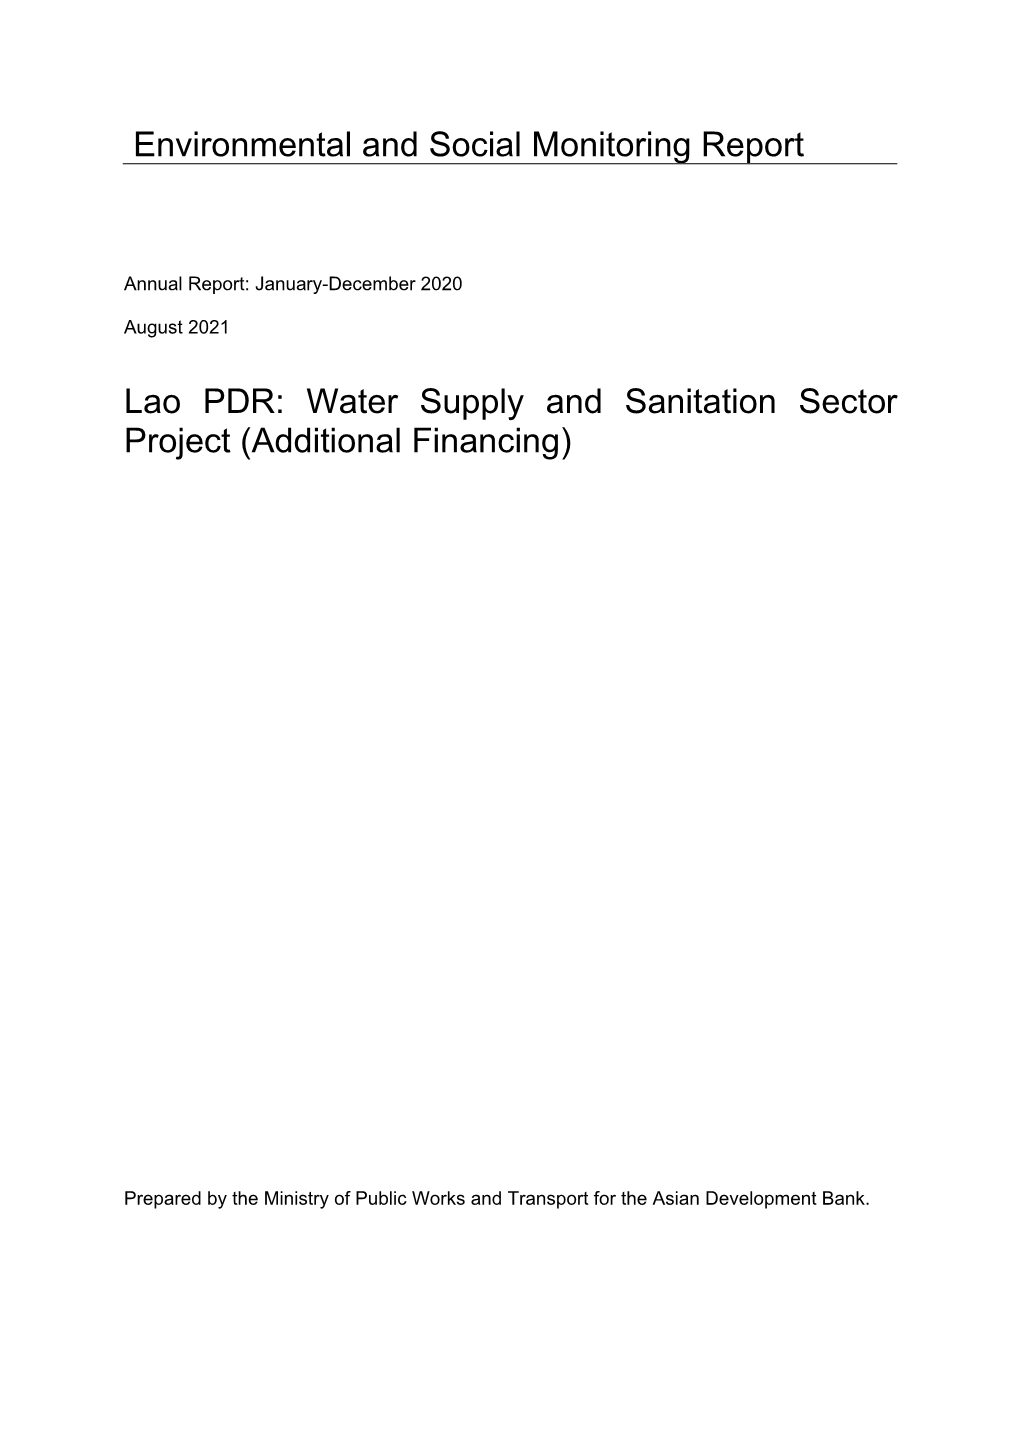 45301-002: Water Supply and Sanitation Sector Project